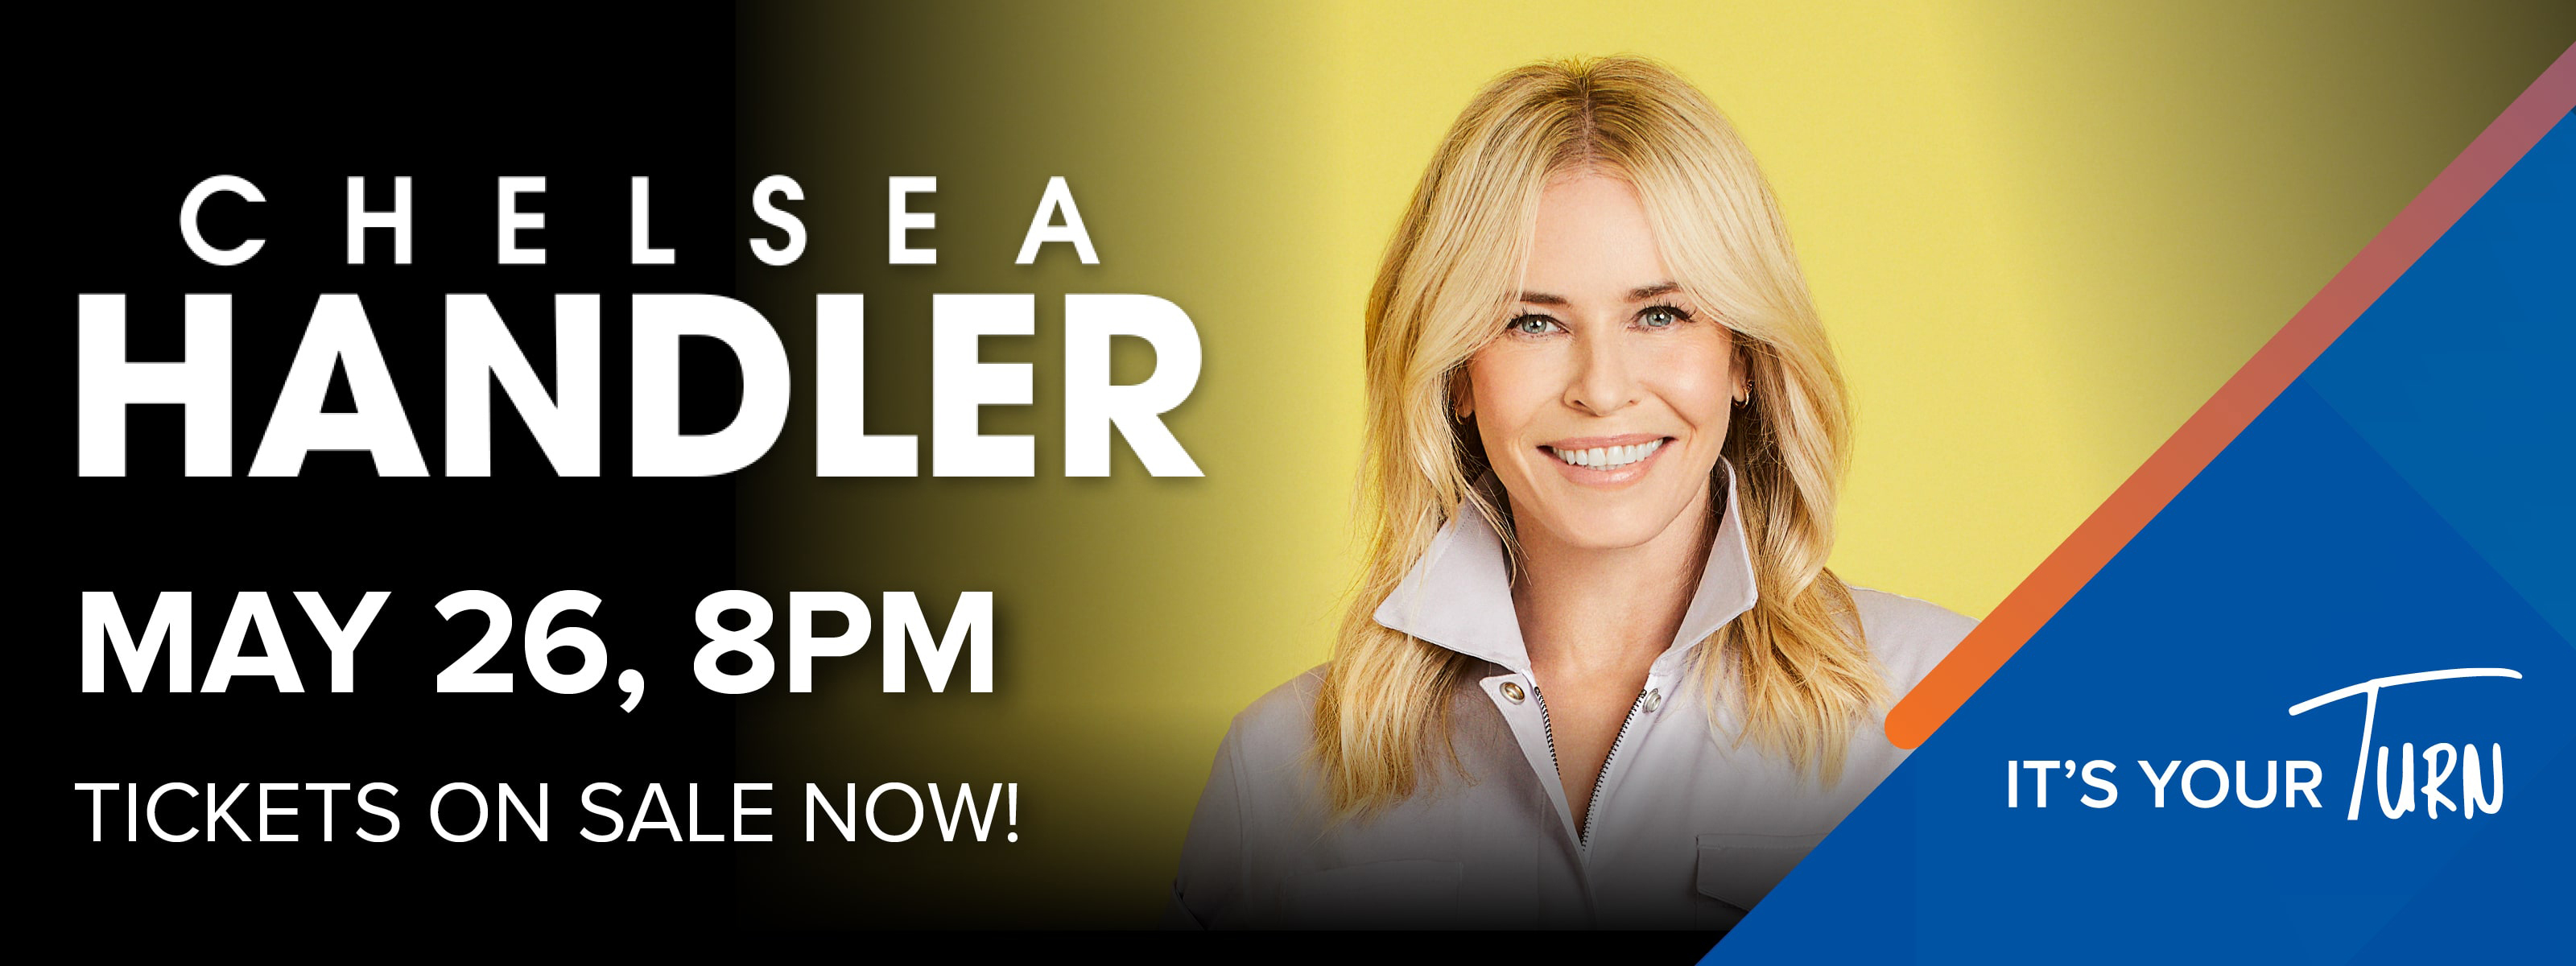 Chelsea Handler May 11, 8pm Tickets On Sale Now